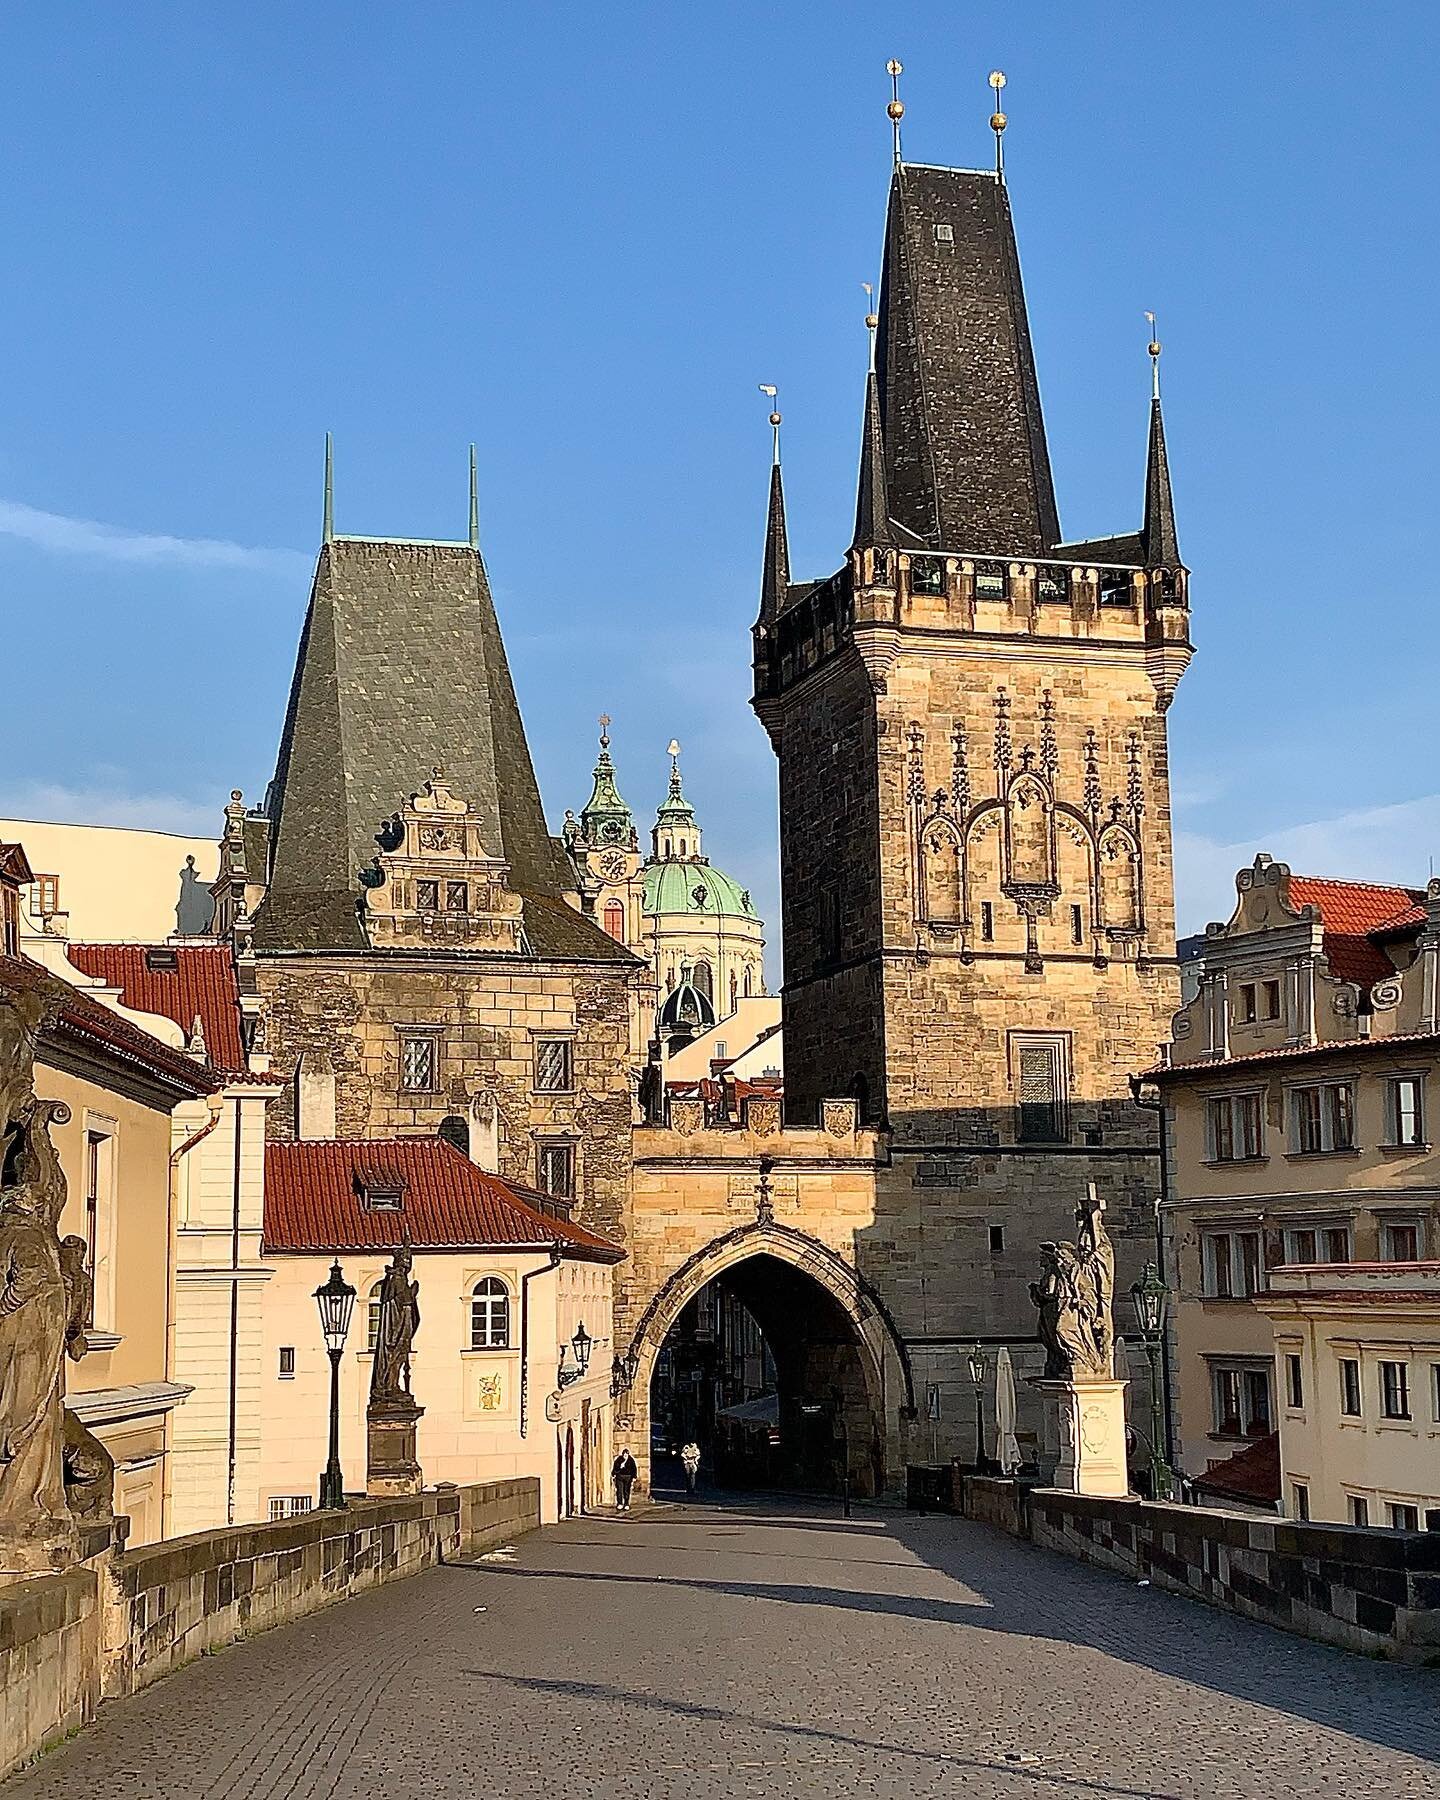 The City of Spires&thinsp;
&thinsp;
A defining feature of Prague is its many tall spires. Lots of the city's notable structures were initiated and/or built during the rule of Karel (Carl) IV, Holy Roman Emperor.&thinsp;
&thinsp;
Karel made Prague (hi